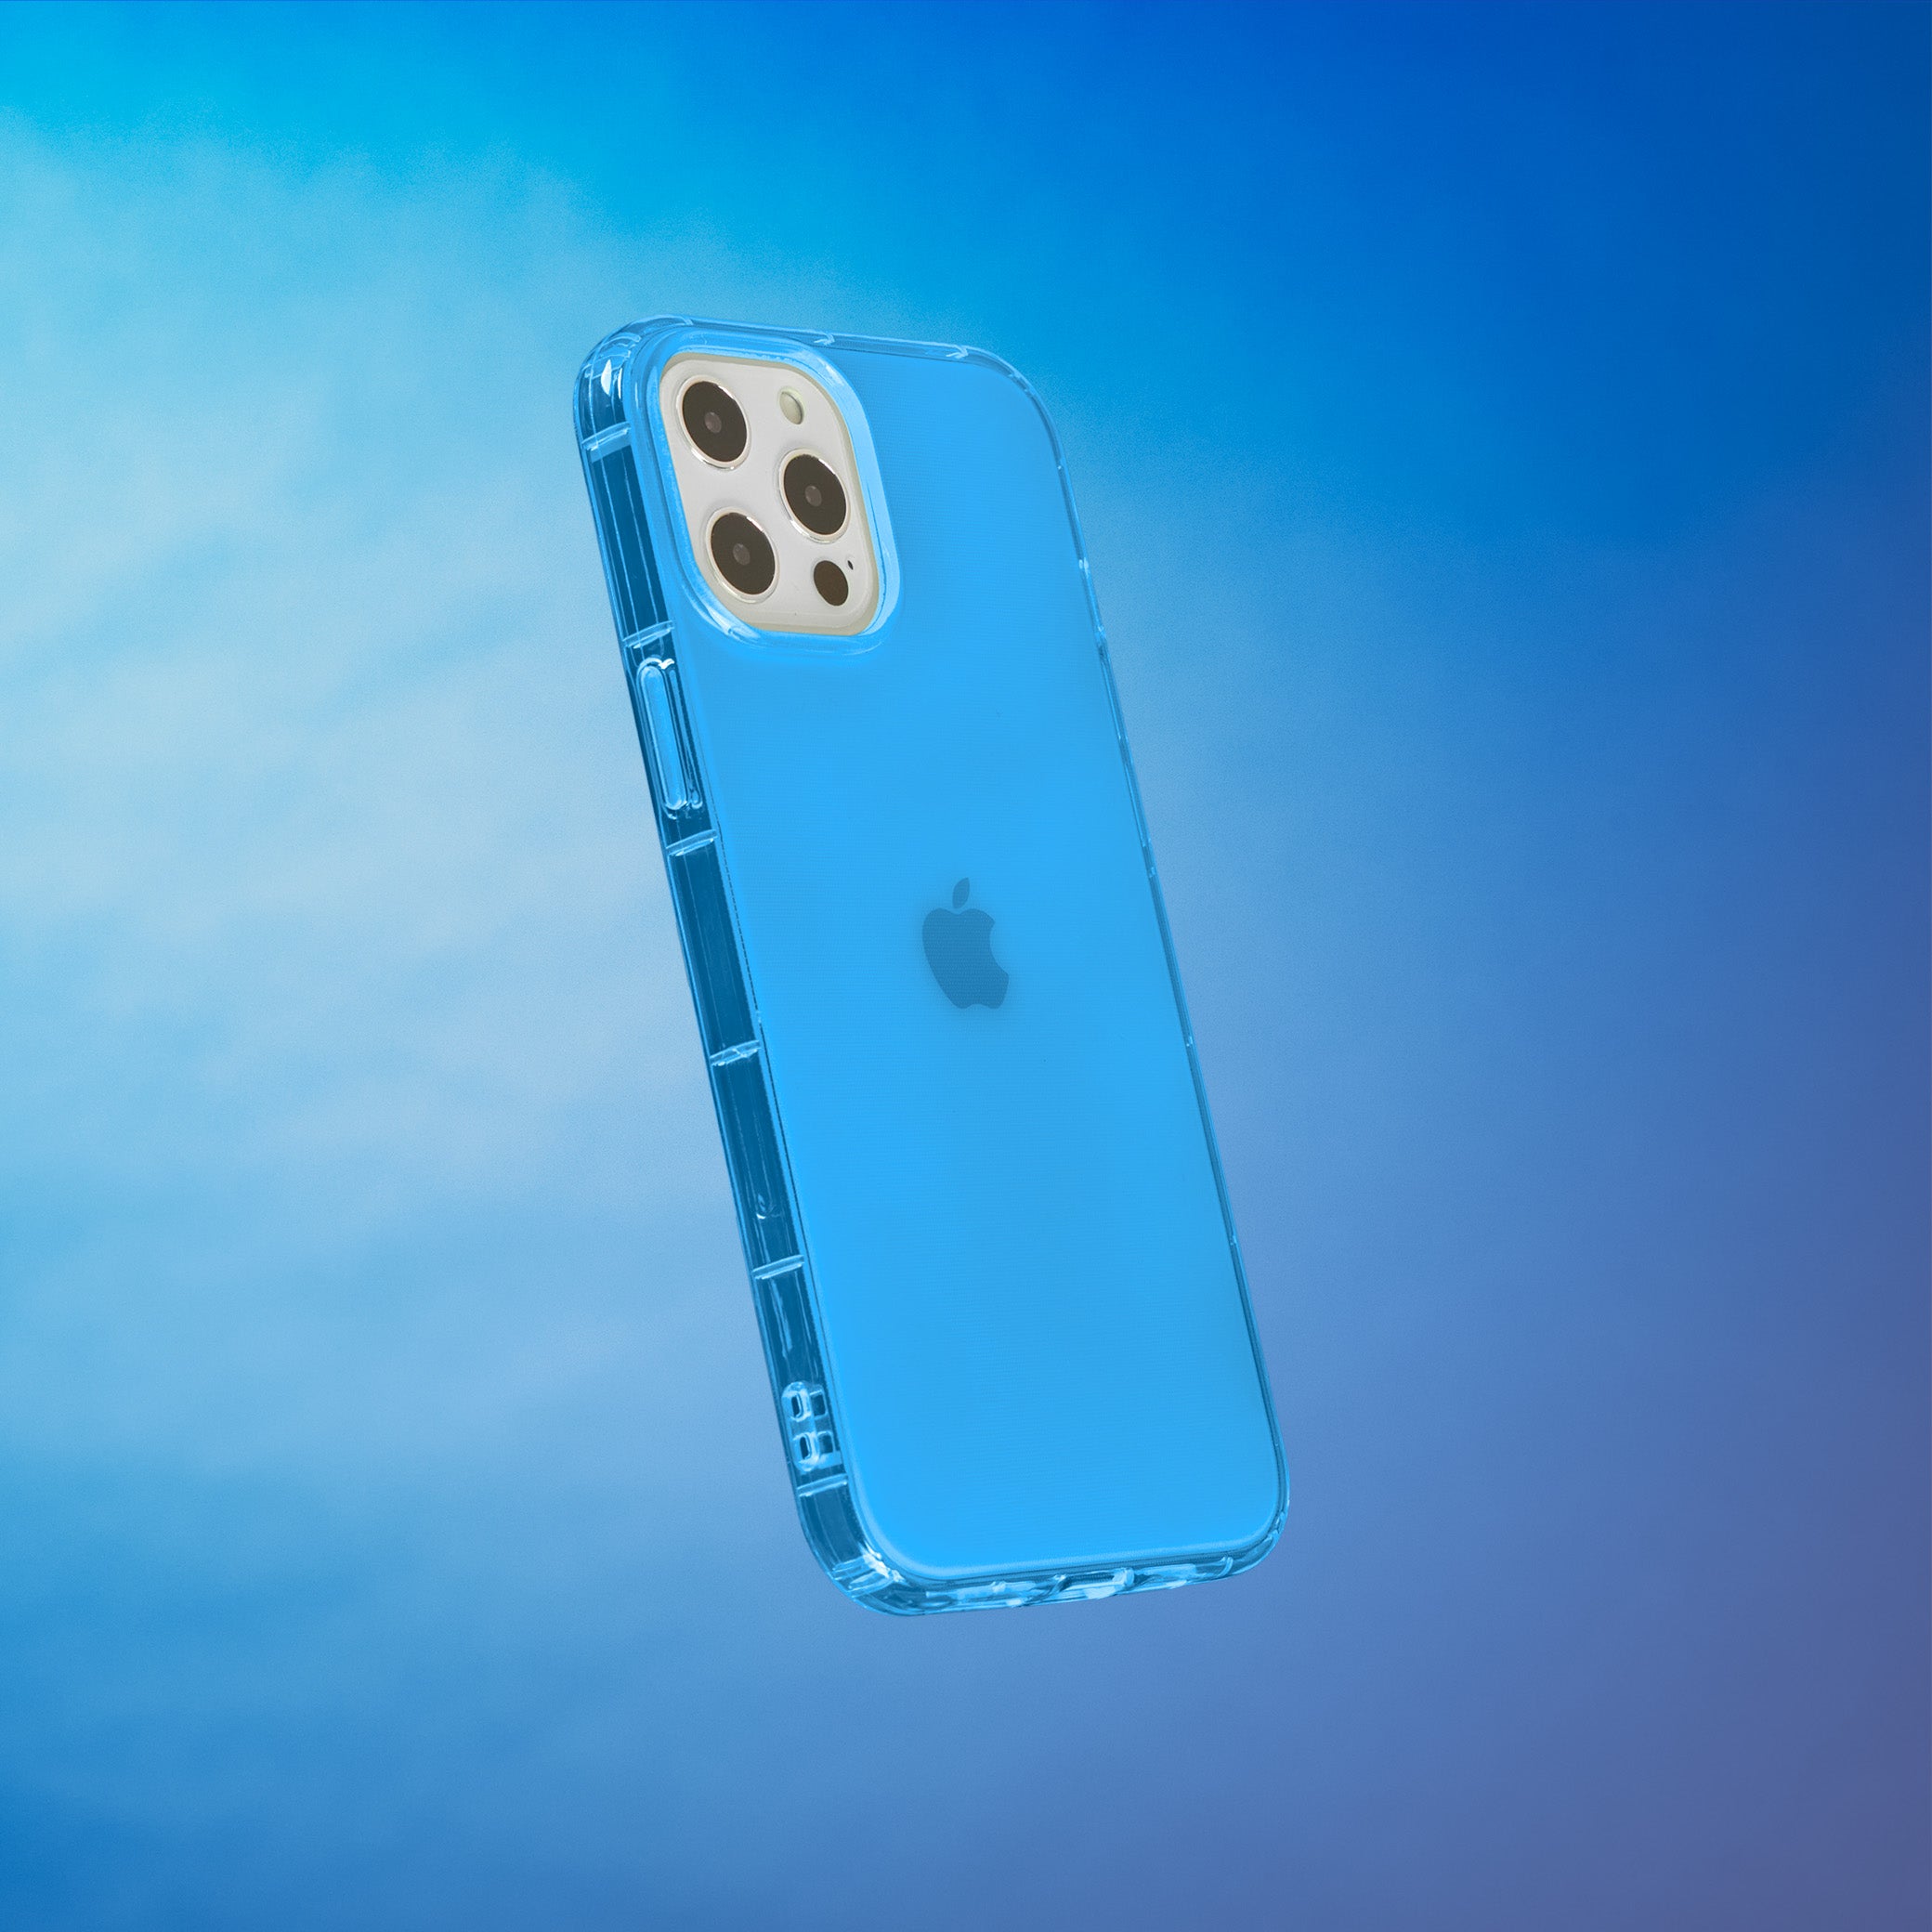 Highlighter Case for iPhone 12 Pro Max - Elevated Azure Blue